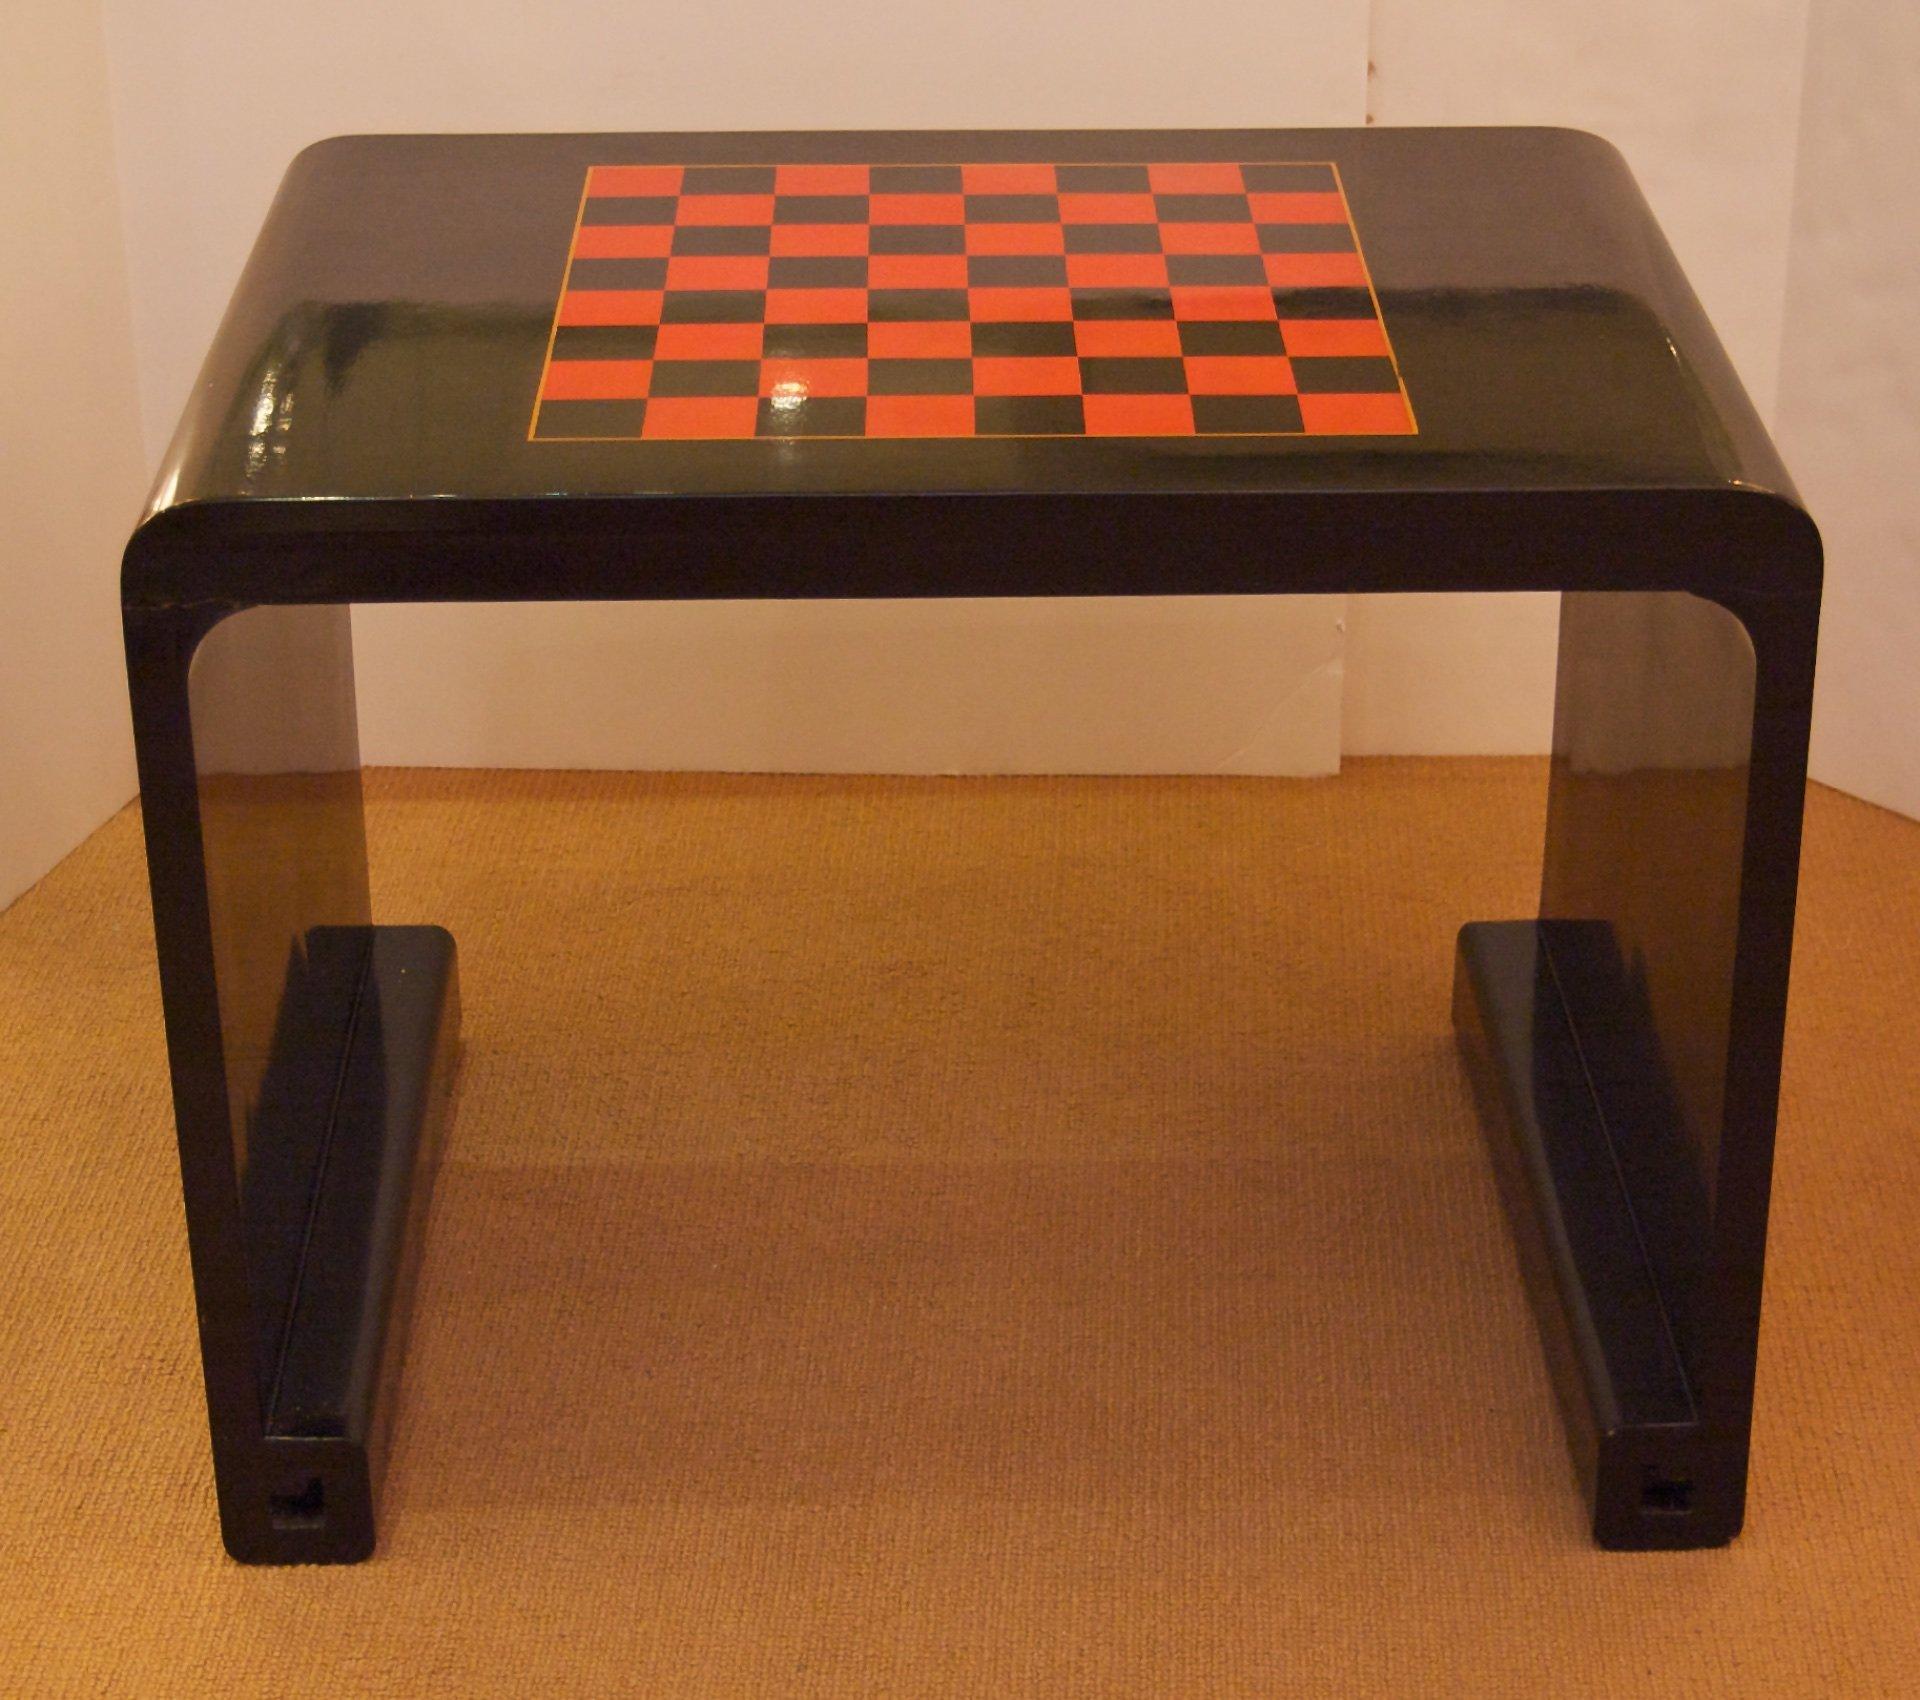 Elegant chinoiserie French game table in black lacquer, with gilt detailing and a checkerboard pattern on the top.
Signed 1937.